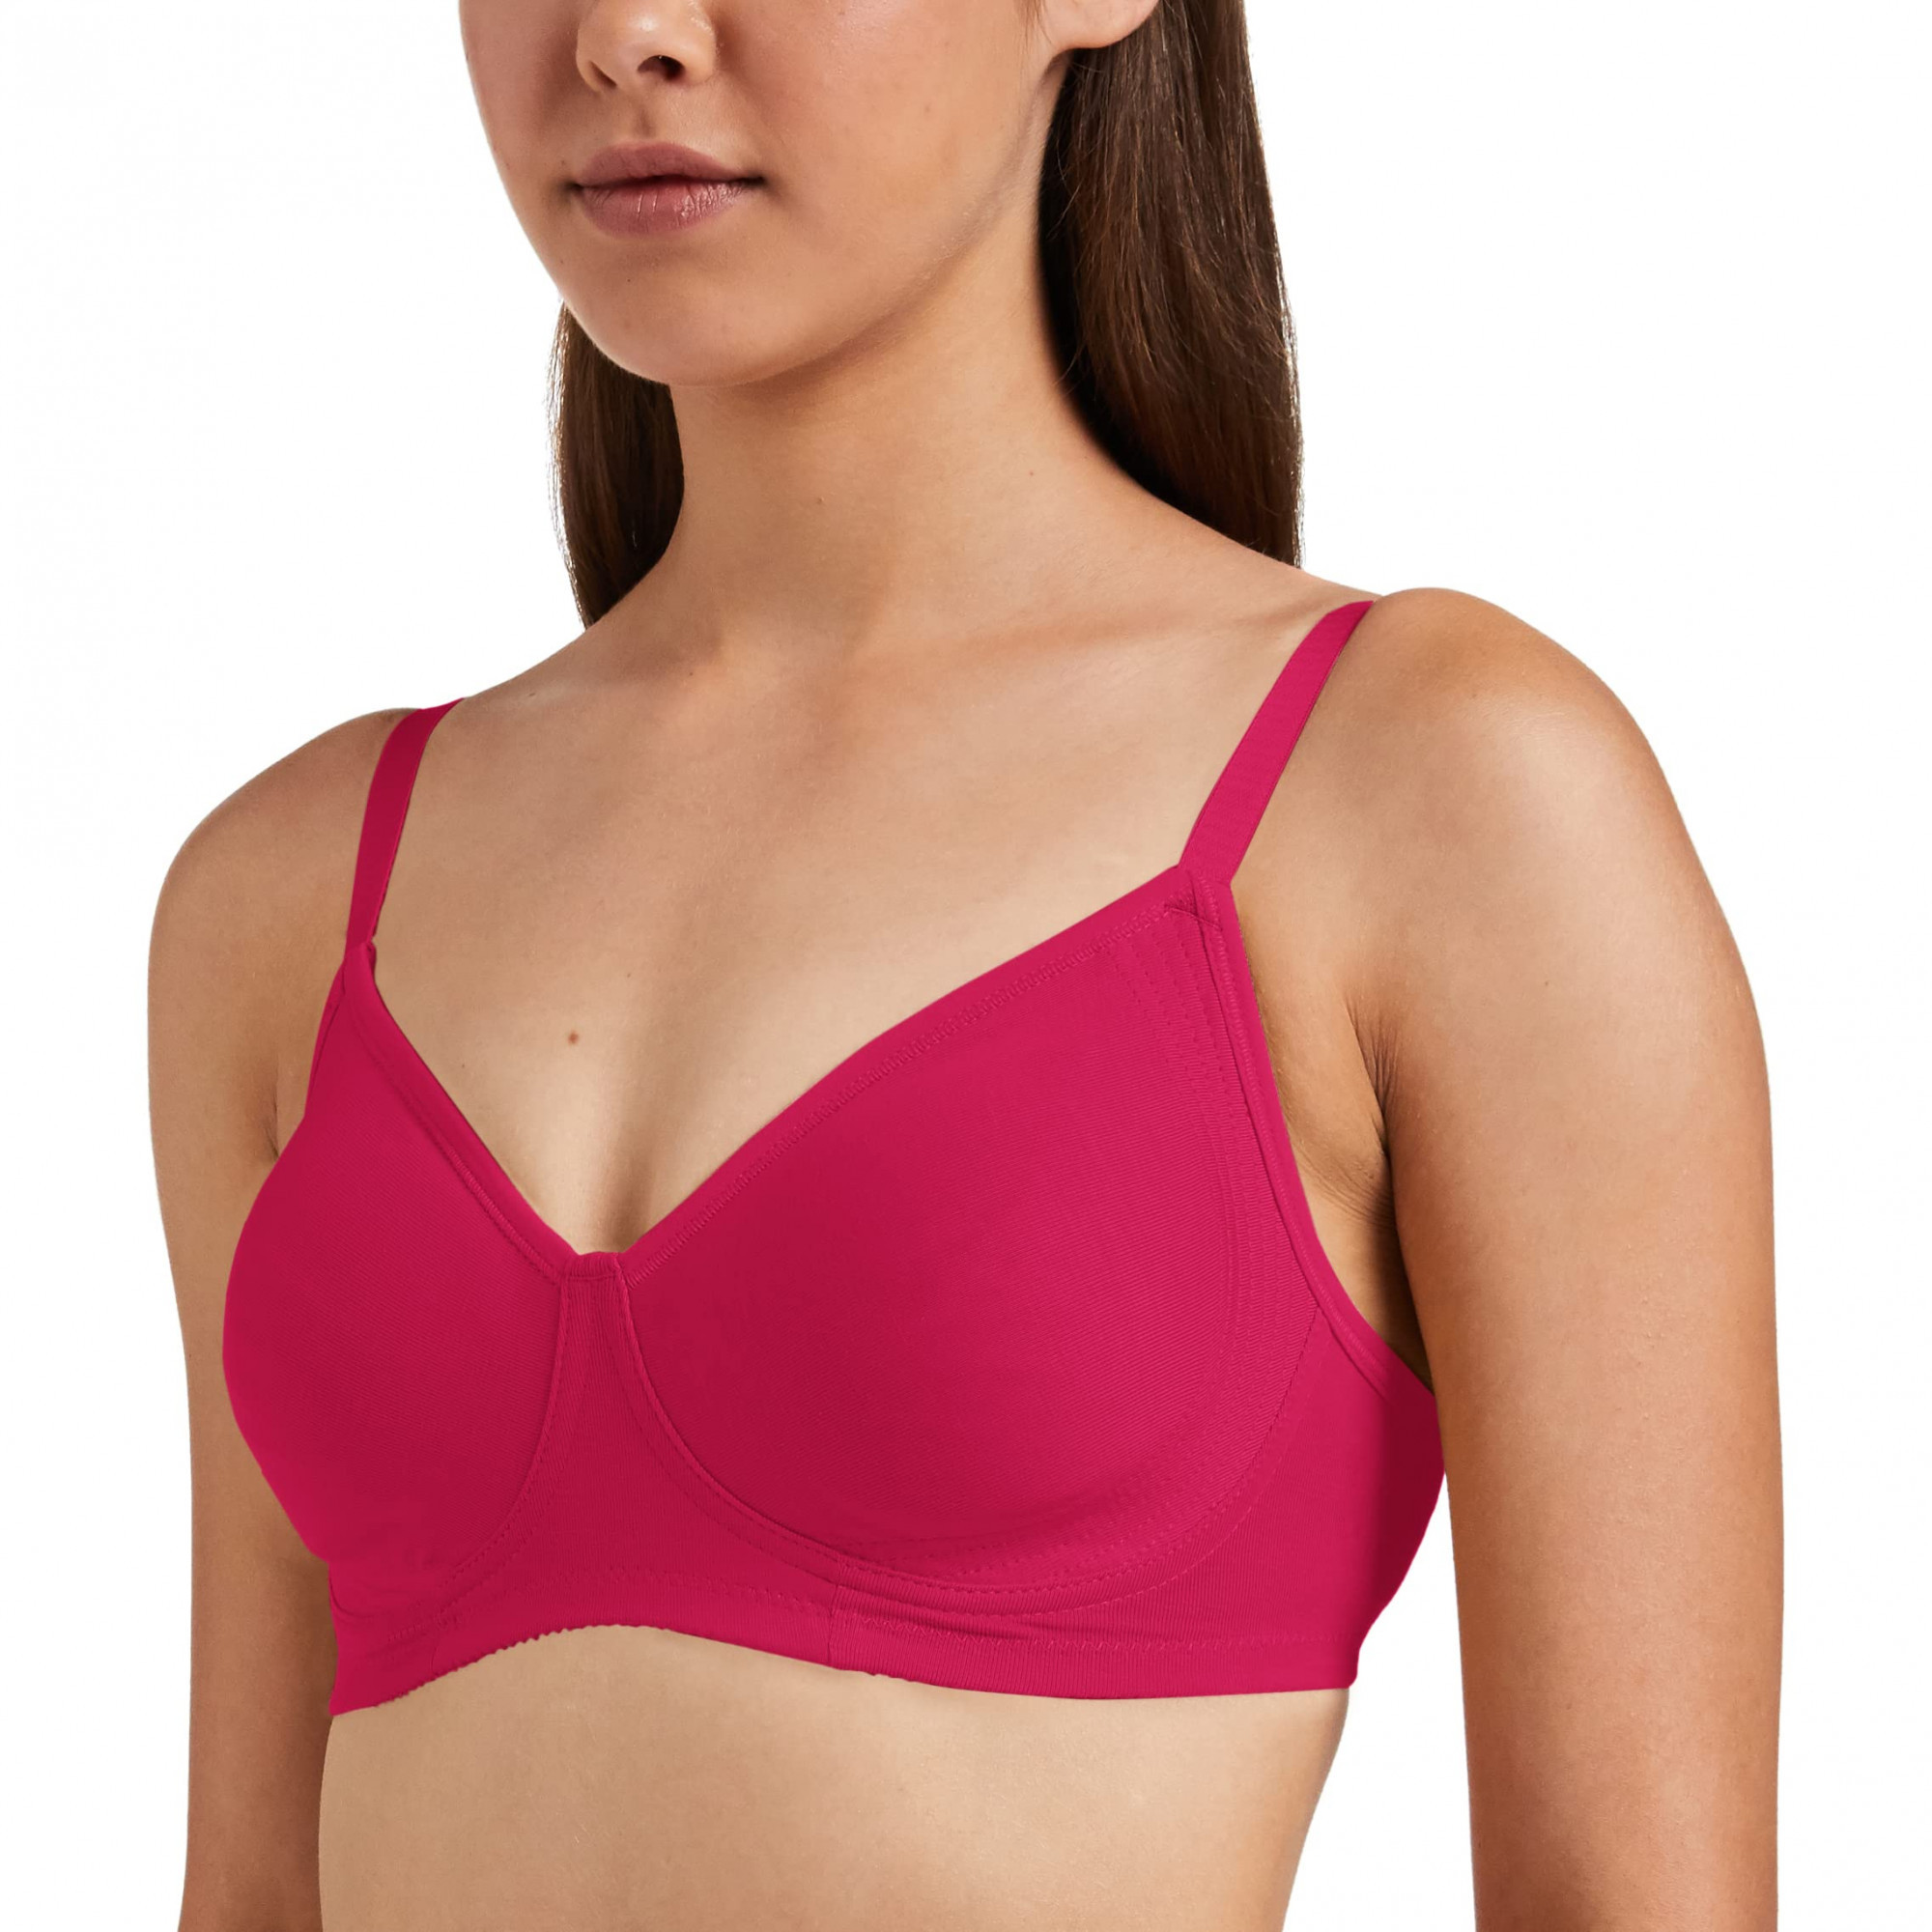 Enamor Everyday Side Support Shaper Stretch Cotton Bra For Women - High  Coverage, Non-Padded, Wirefree, A042